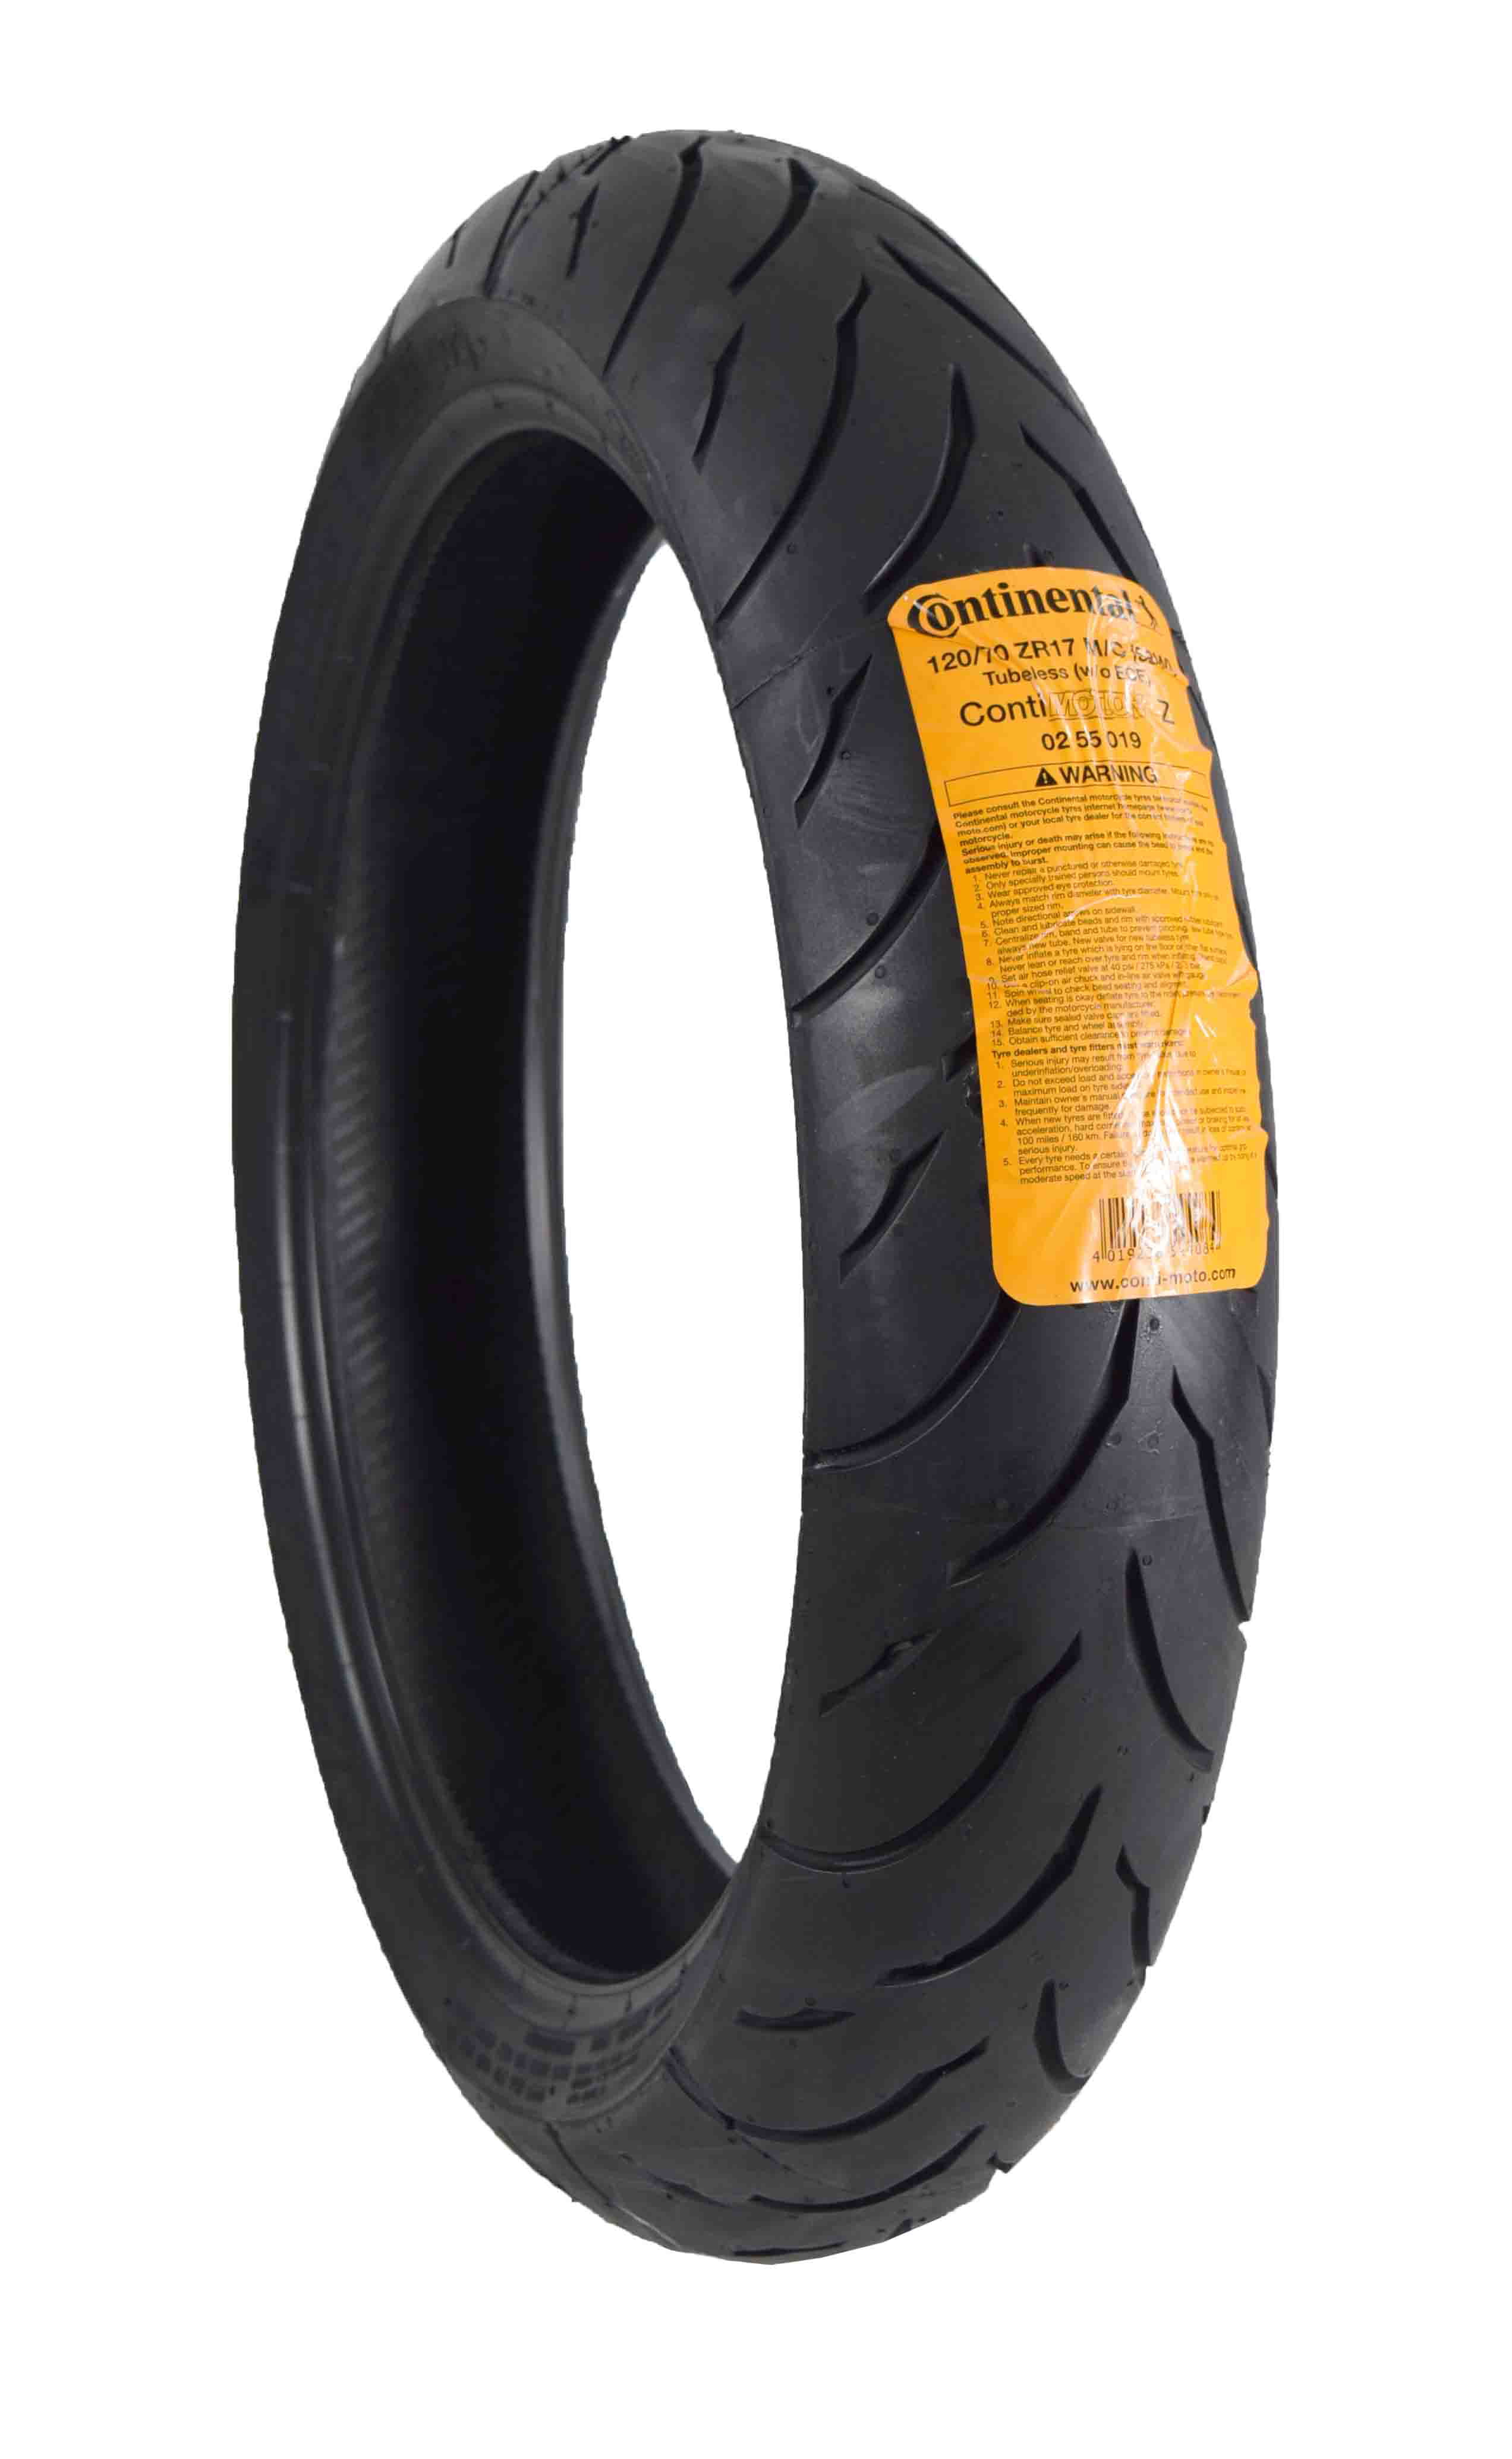 for Honda CB 1100 SF X11 Front Tyre 120/70 Zr17 Continental ContiMotion for sale online